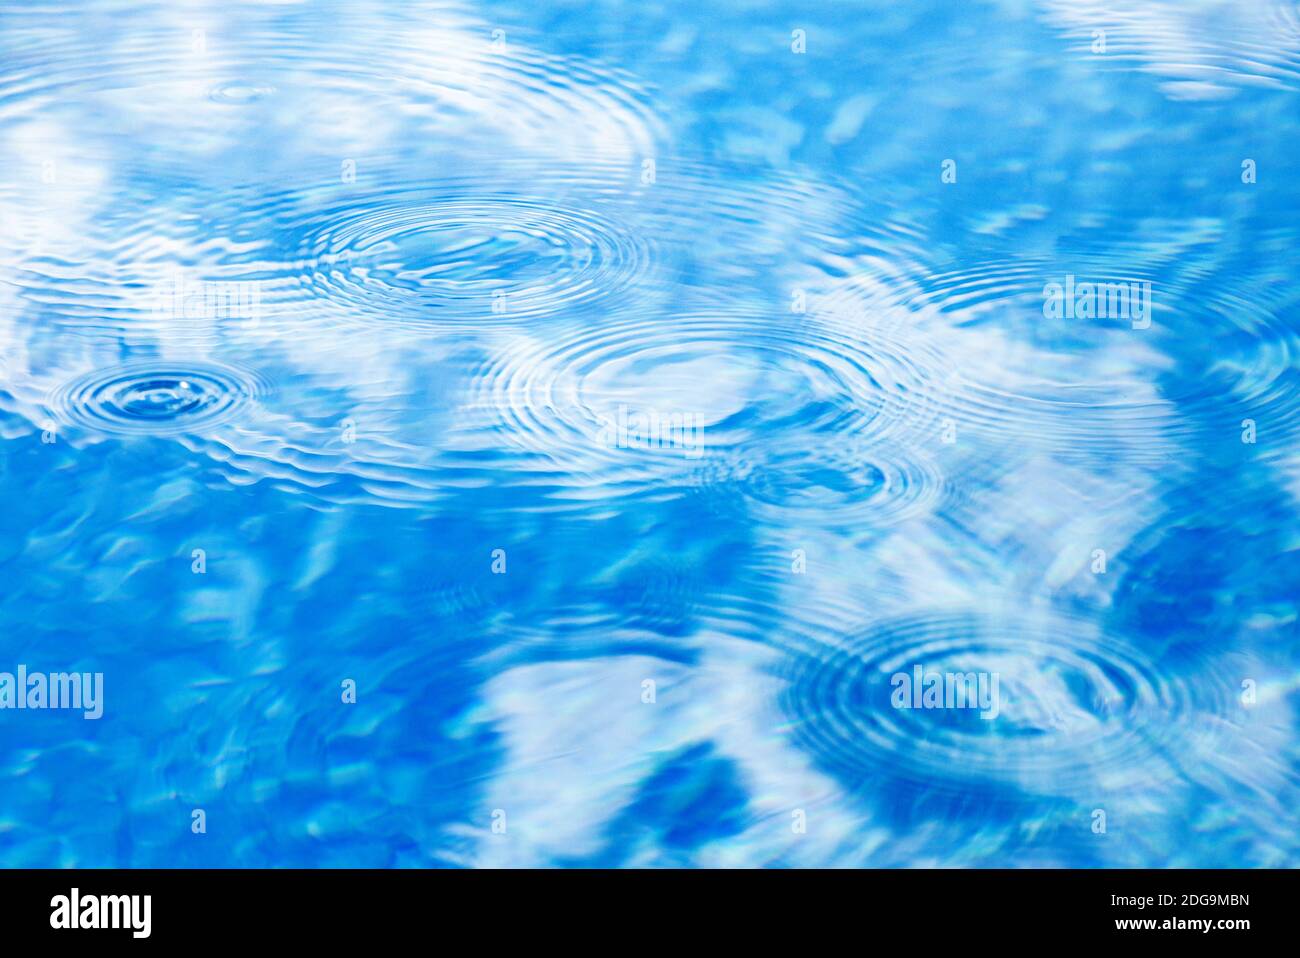 Raindrops on pool blue water surface. Blue water texture as background. Stains circles on the water from rain Stock Photo